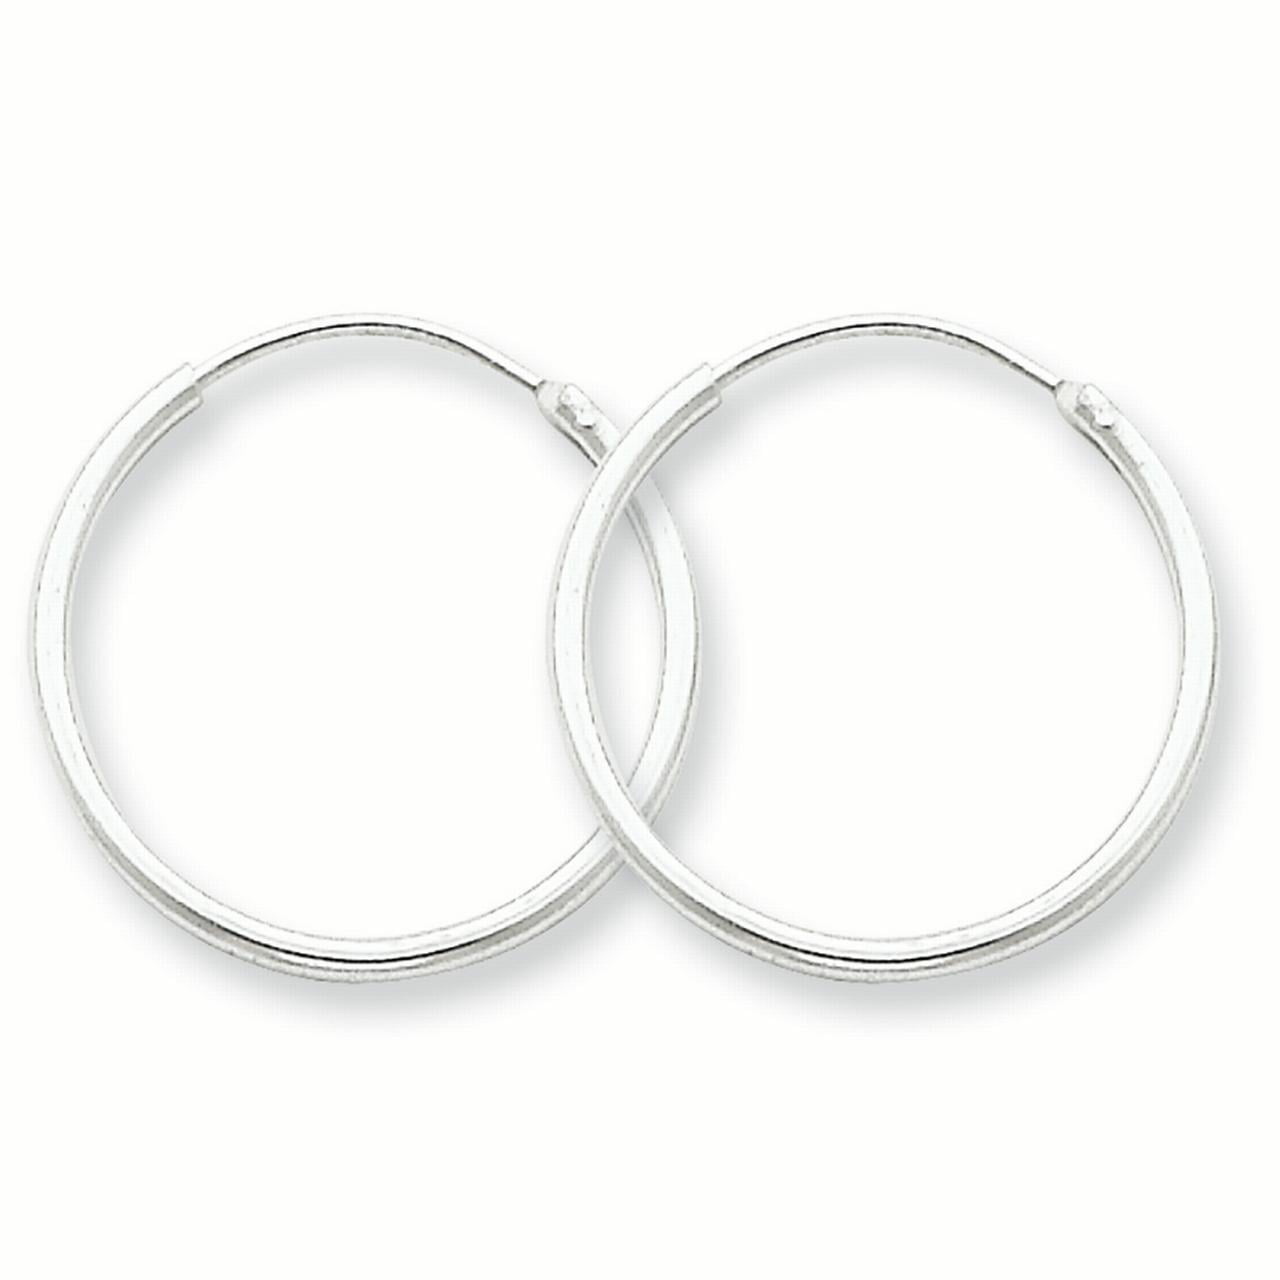 2mm X 20mm All Shiny Large Plain Endless Hoop Earrings Sterling Silver 925 